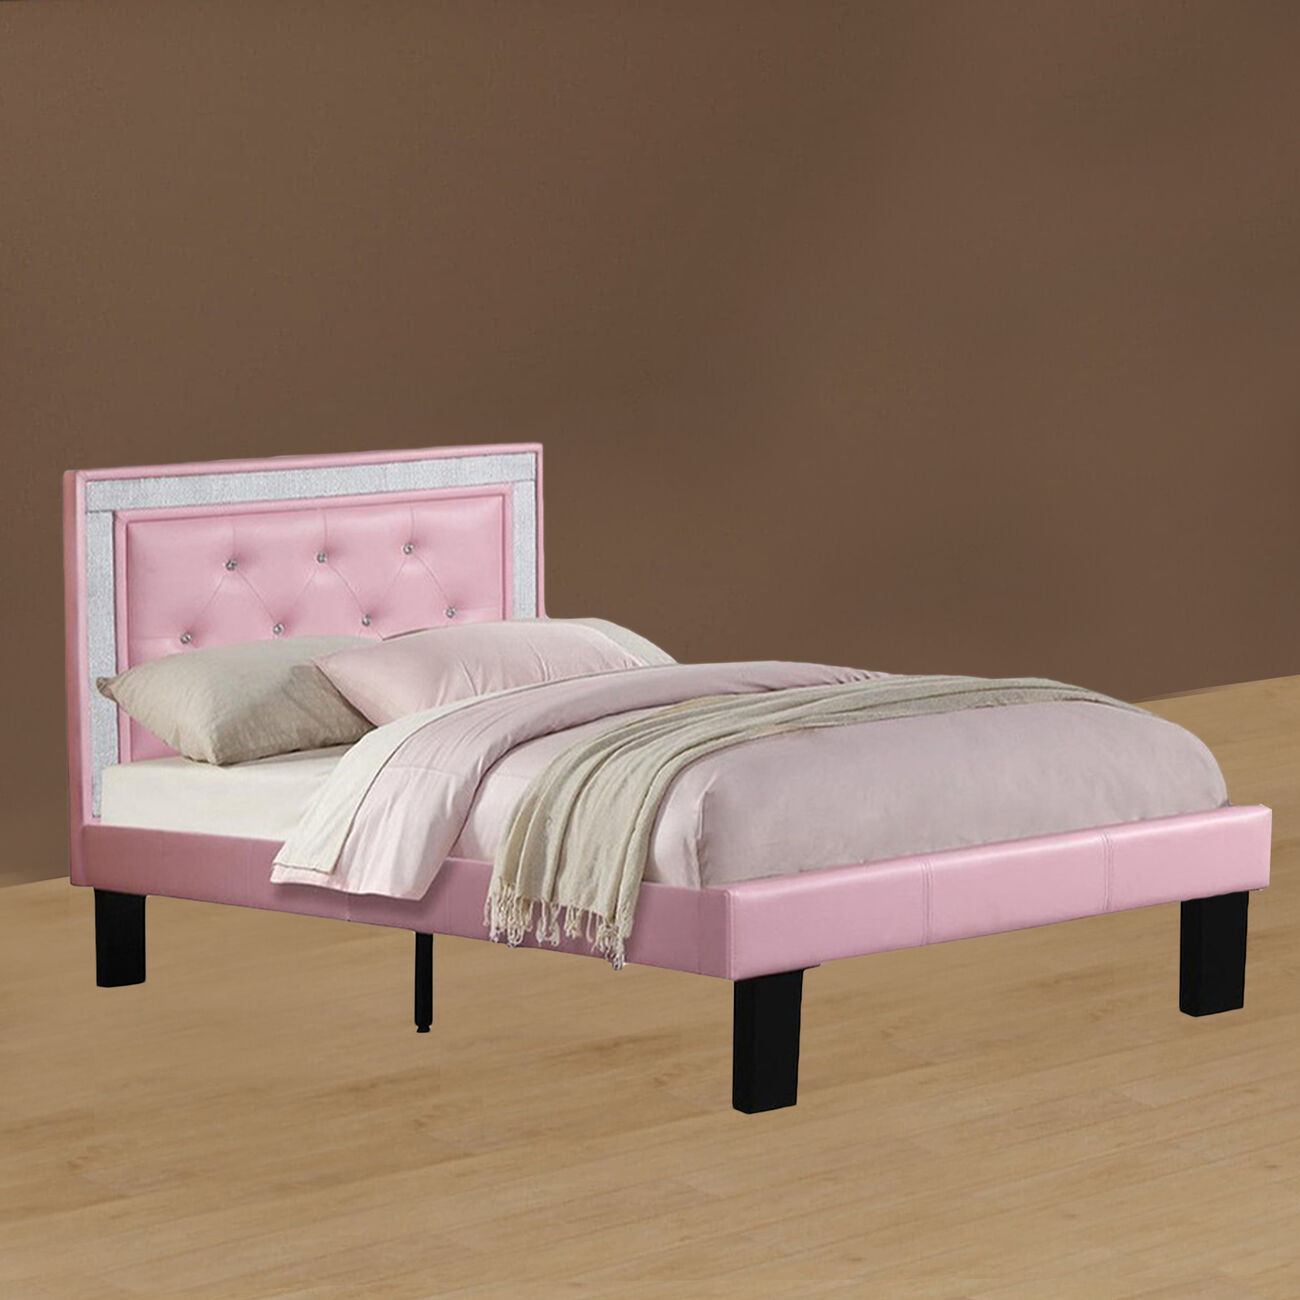 Wooden Full Bed With Pink PU Tufted Head Board, Pink Finish